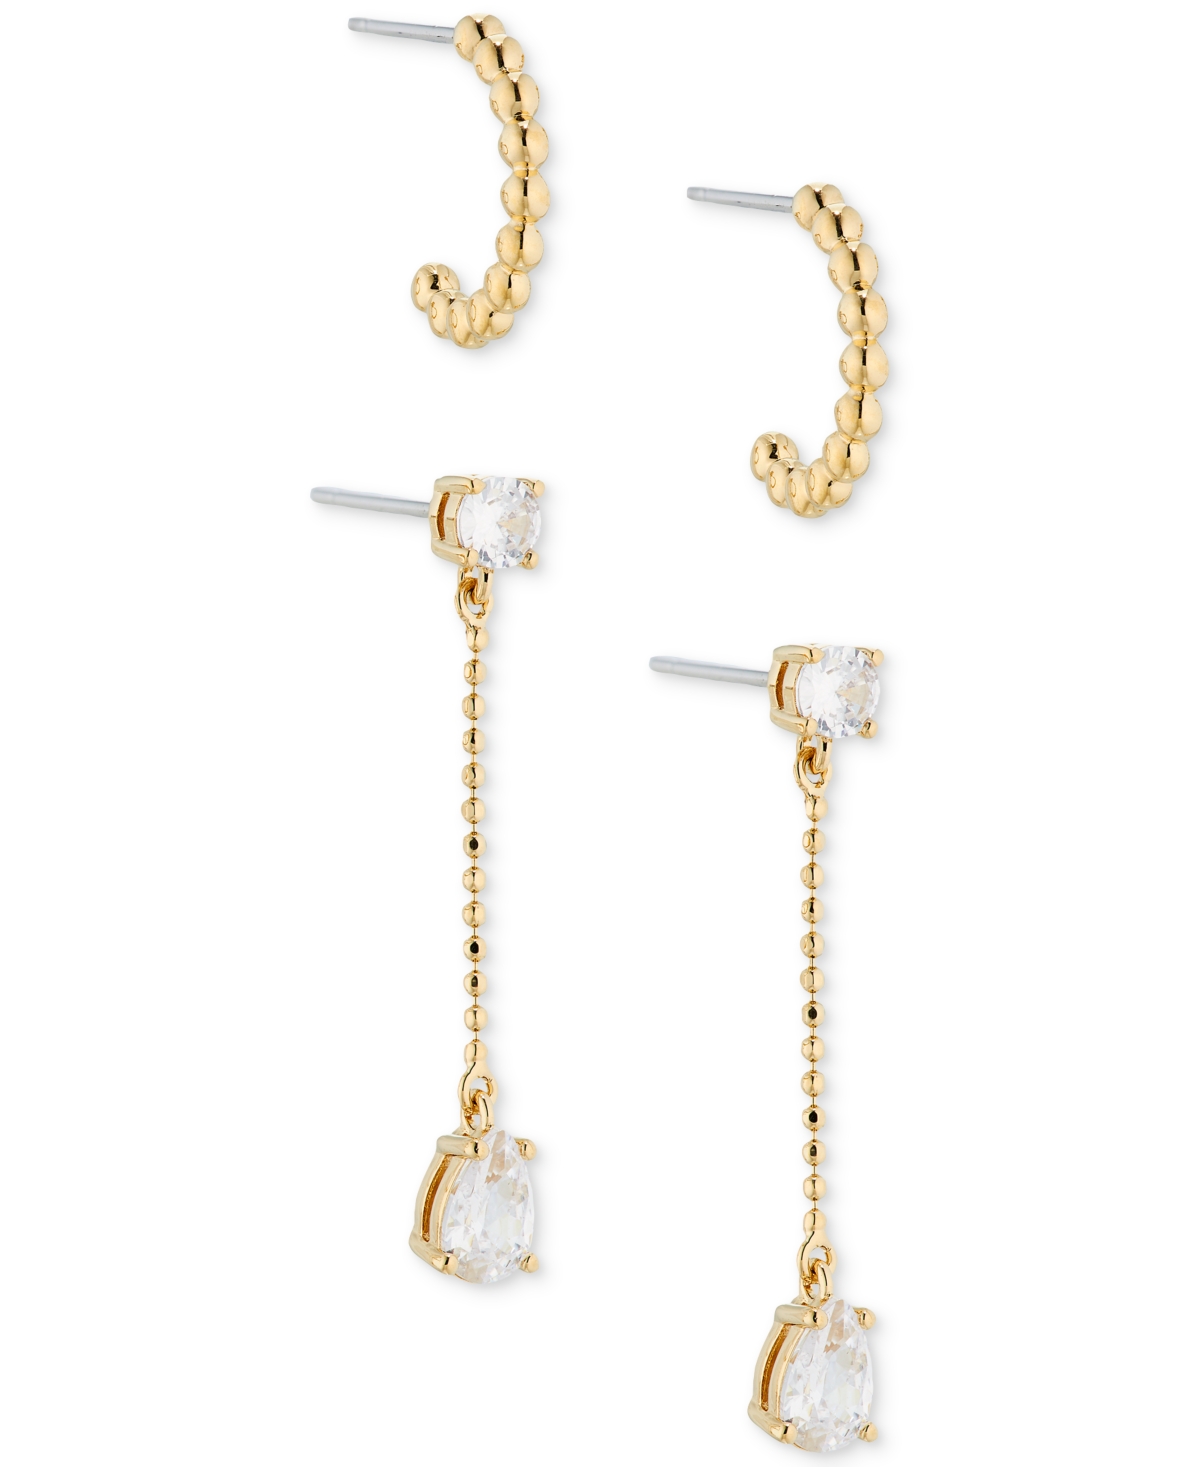 18k Gold-Plated 2-Pc. Set Granulated C-Hoop & Cubic Zirconia Ball Chain Linear Drop Earrings - Gold